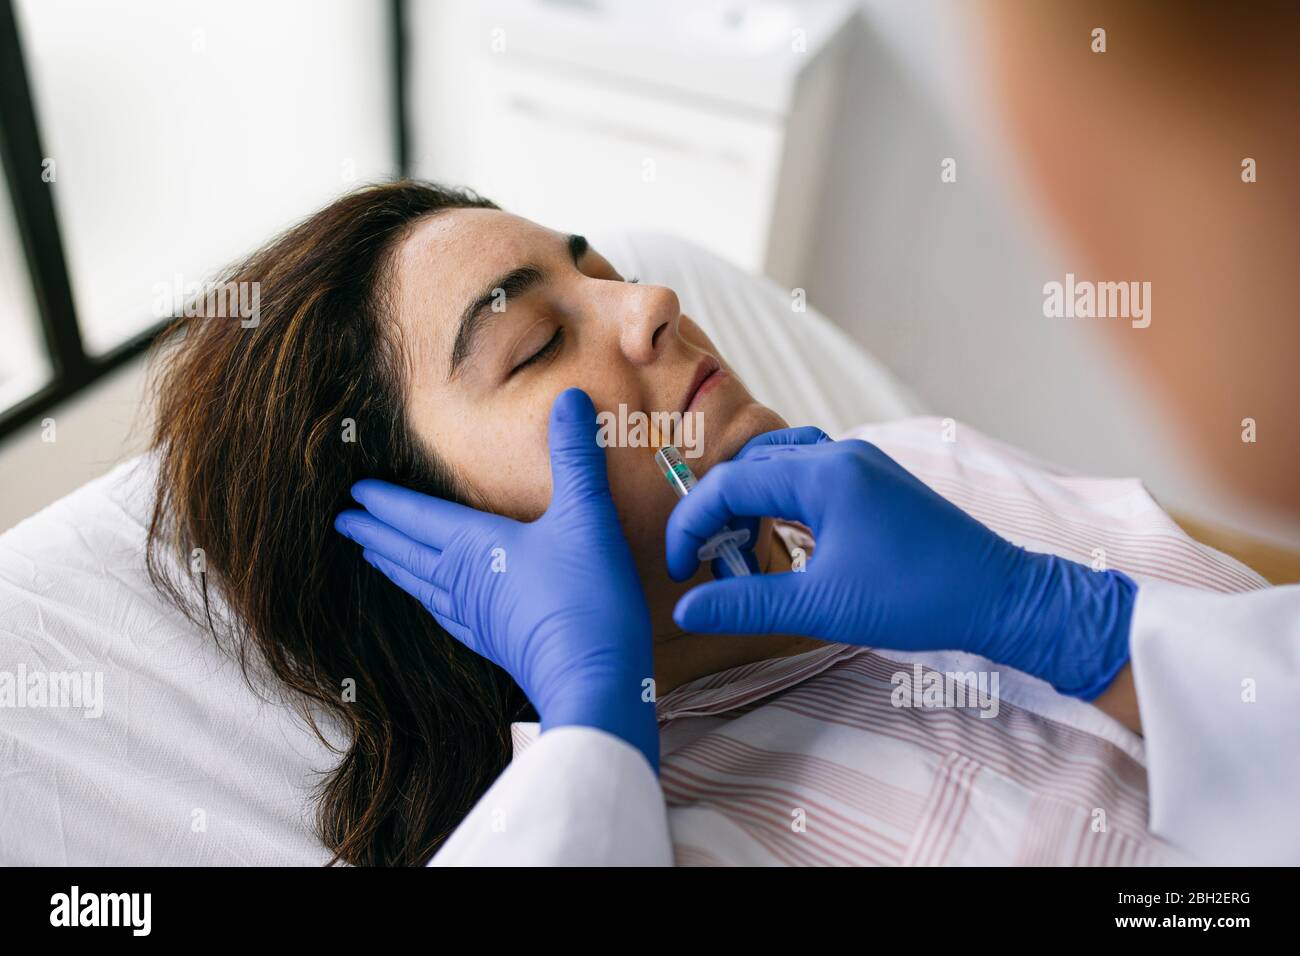 Woman receiving hyaluronic acid injection in medical practice Stock Photo